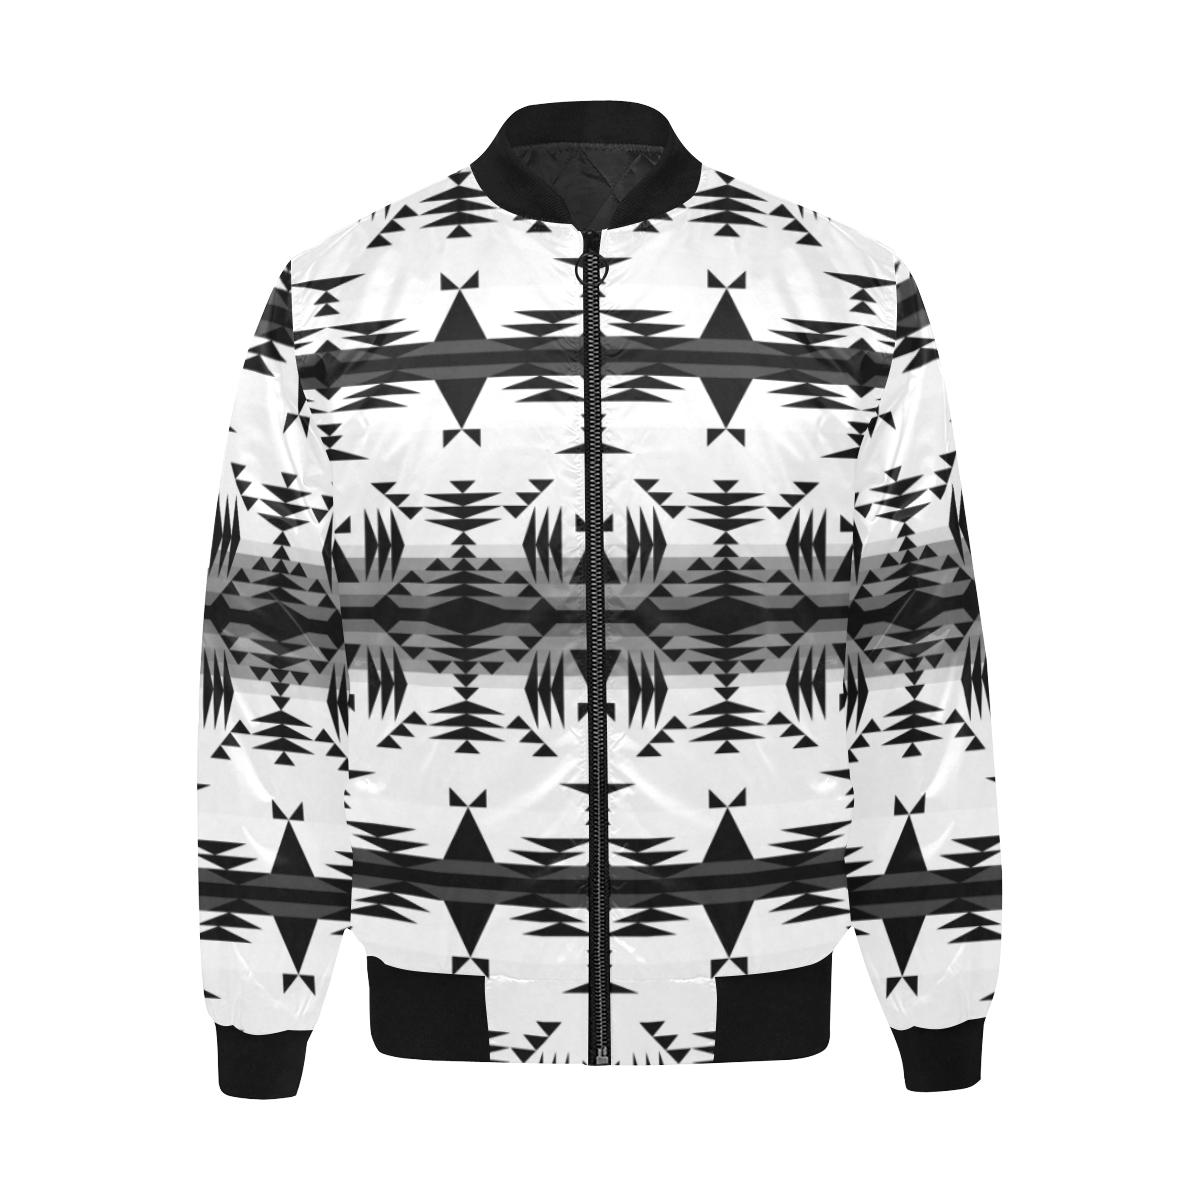 Between the Mountains White and Black Unisex Heavy Bomber Jacket with Quilted Lining All Over Print Quilted Jacket for Men (H33) e-joyer 